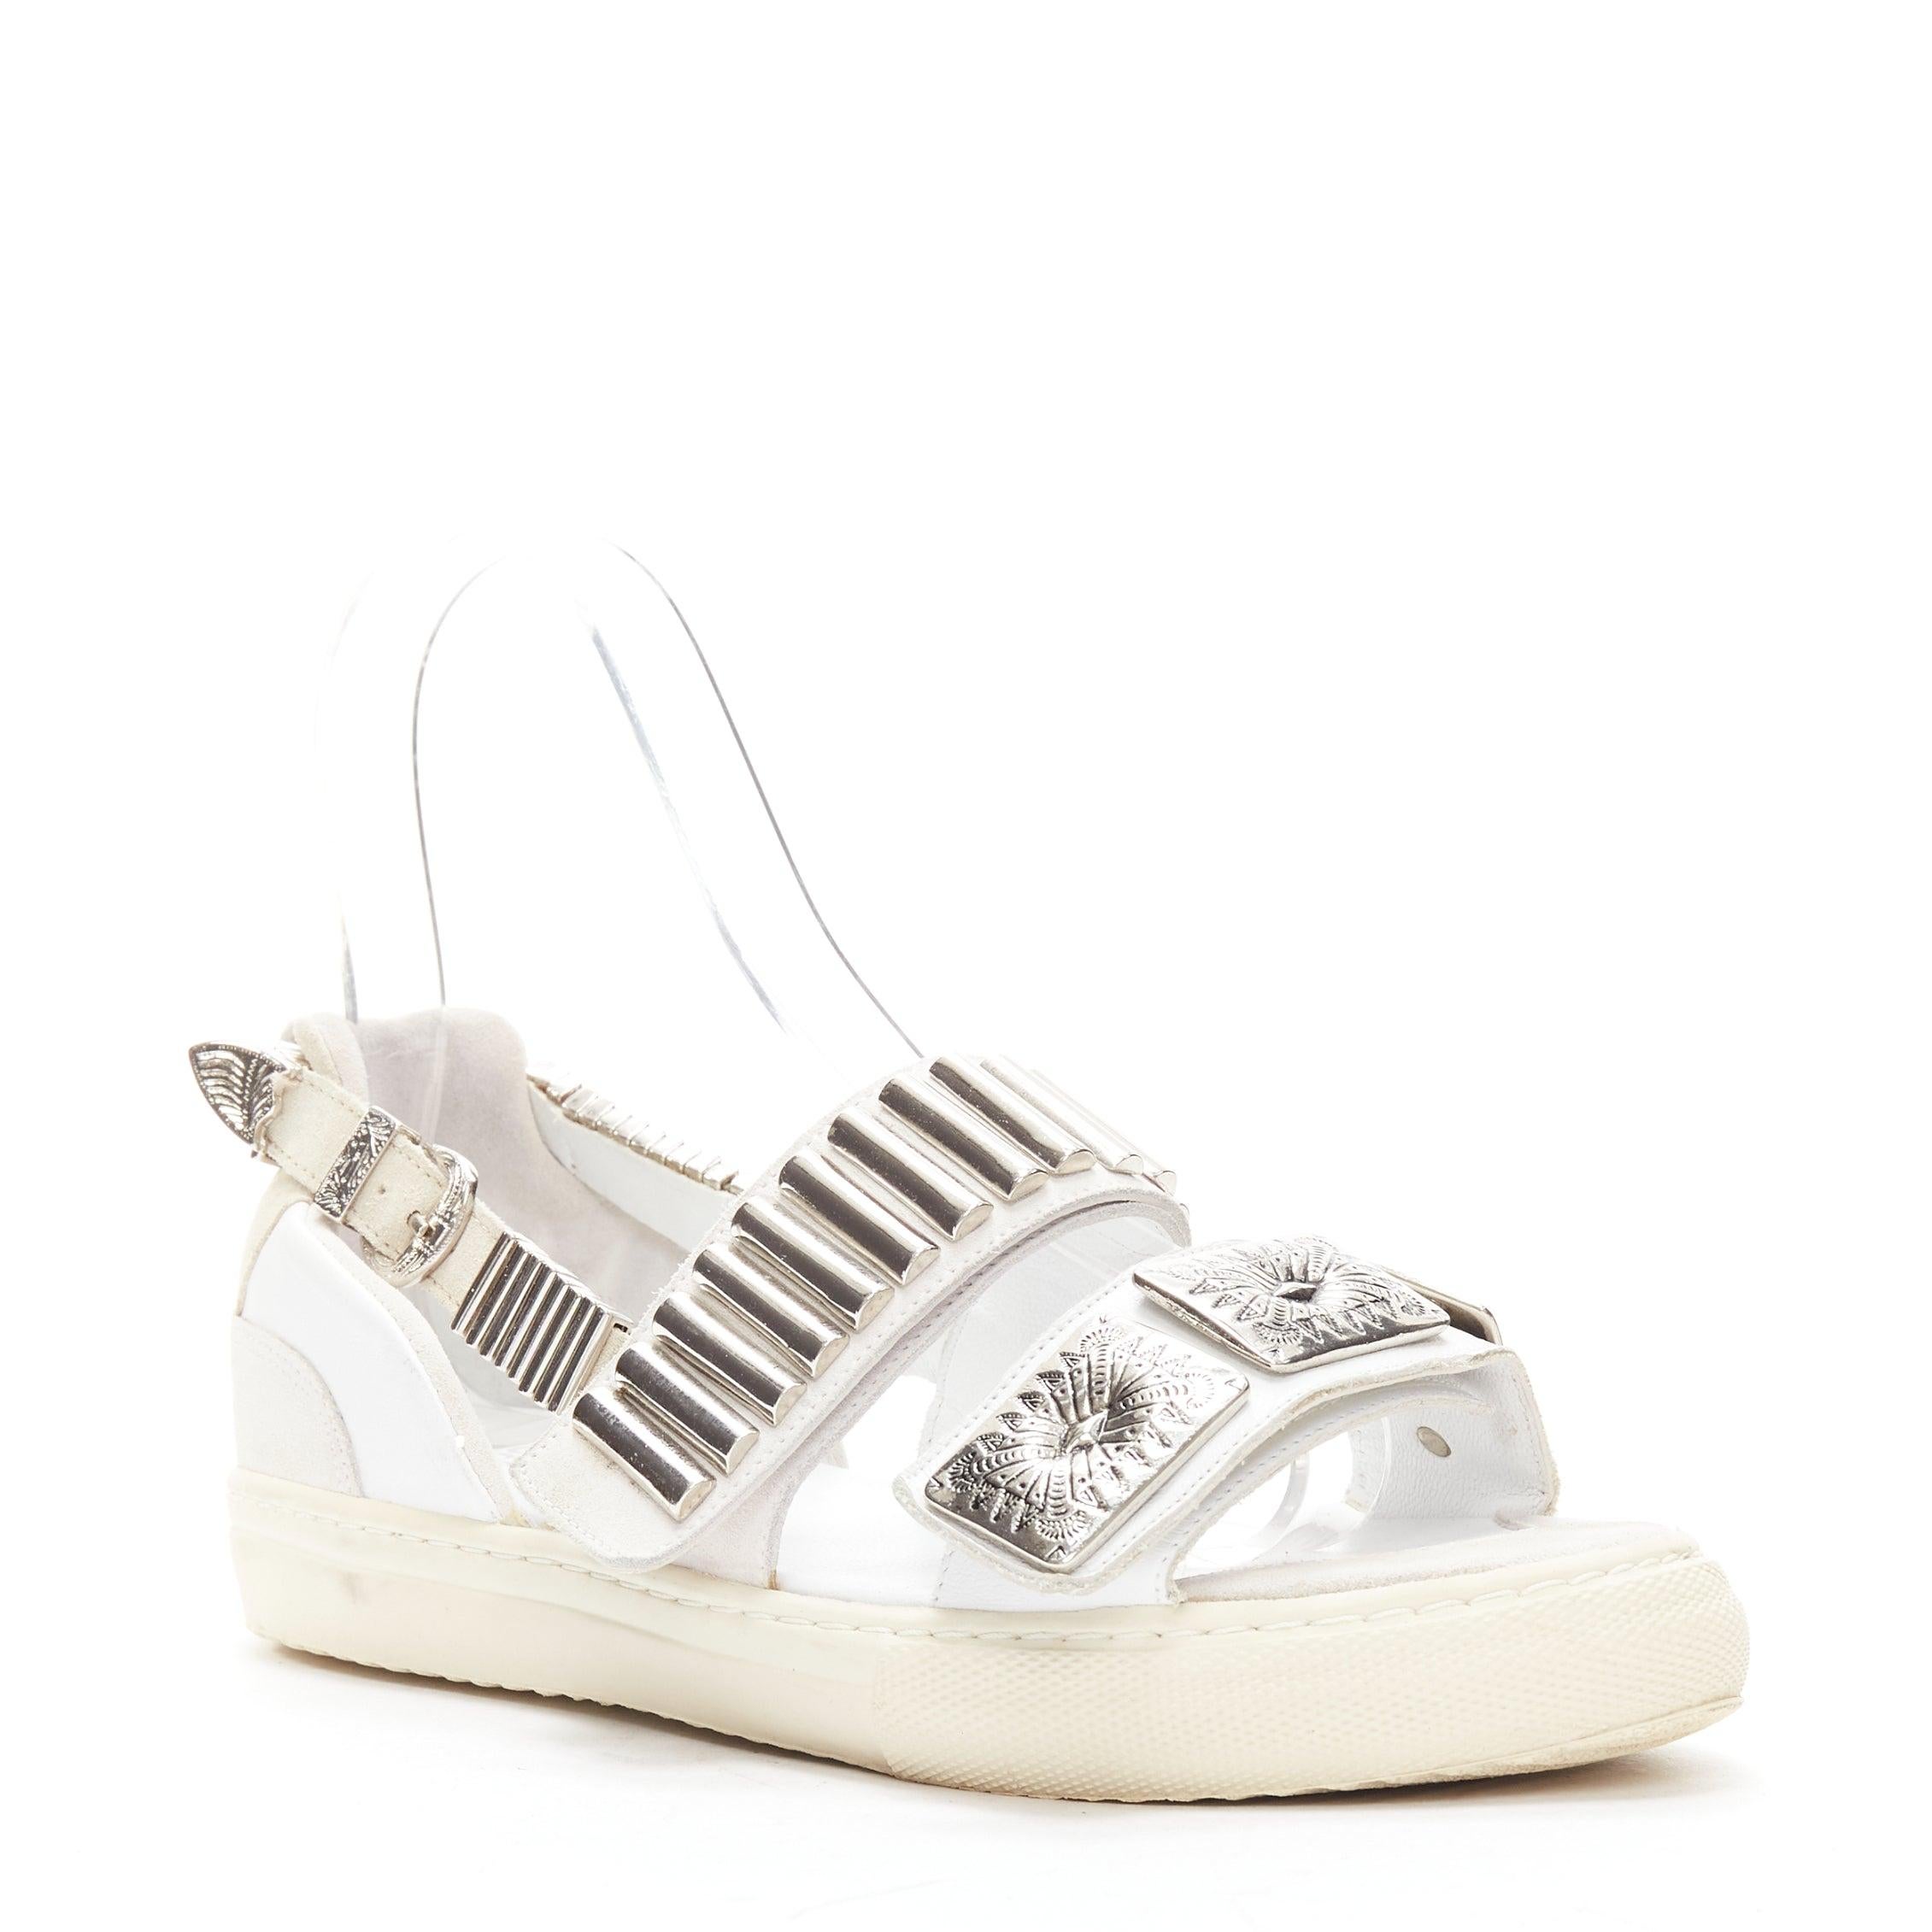 TOGA ARCHIVES 2022 white leather silver metal plate buckle sandals EU39
Reference: BSHW/A00160
Brand: Toga Archives
Material: Leather, Metal
Color: White, Grey
Pattern: Solid
Closure: Belt
Lining: White Leather
Extra Details: Grey suede back heel